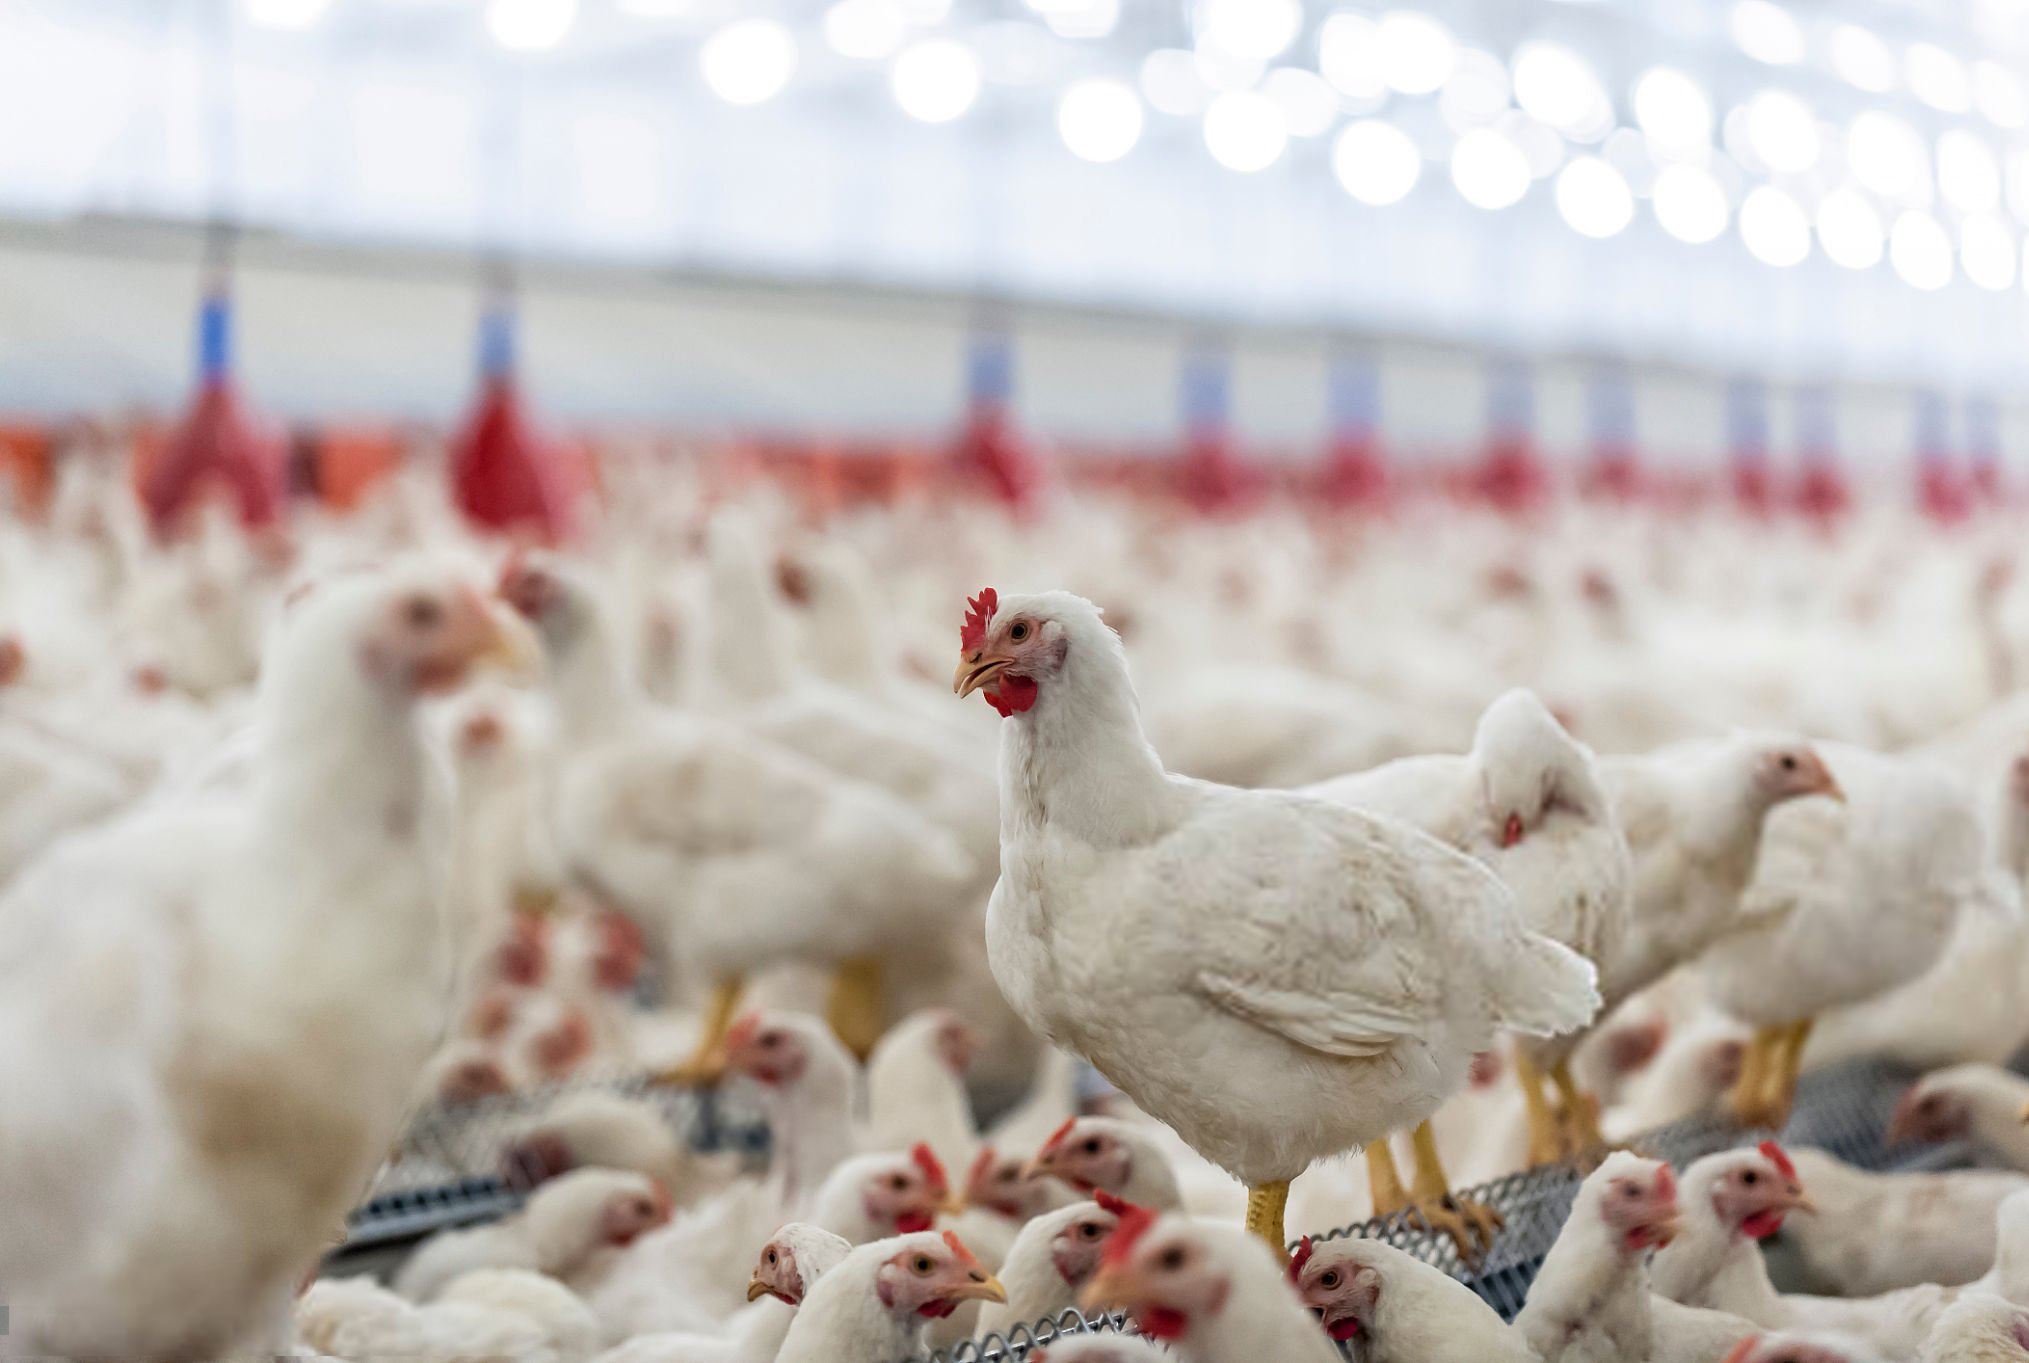 "Precision Poultry Management: The Automated Revolution"